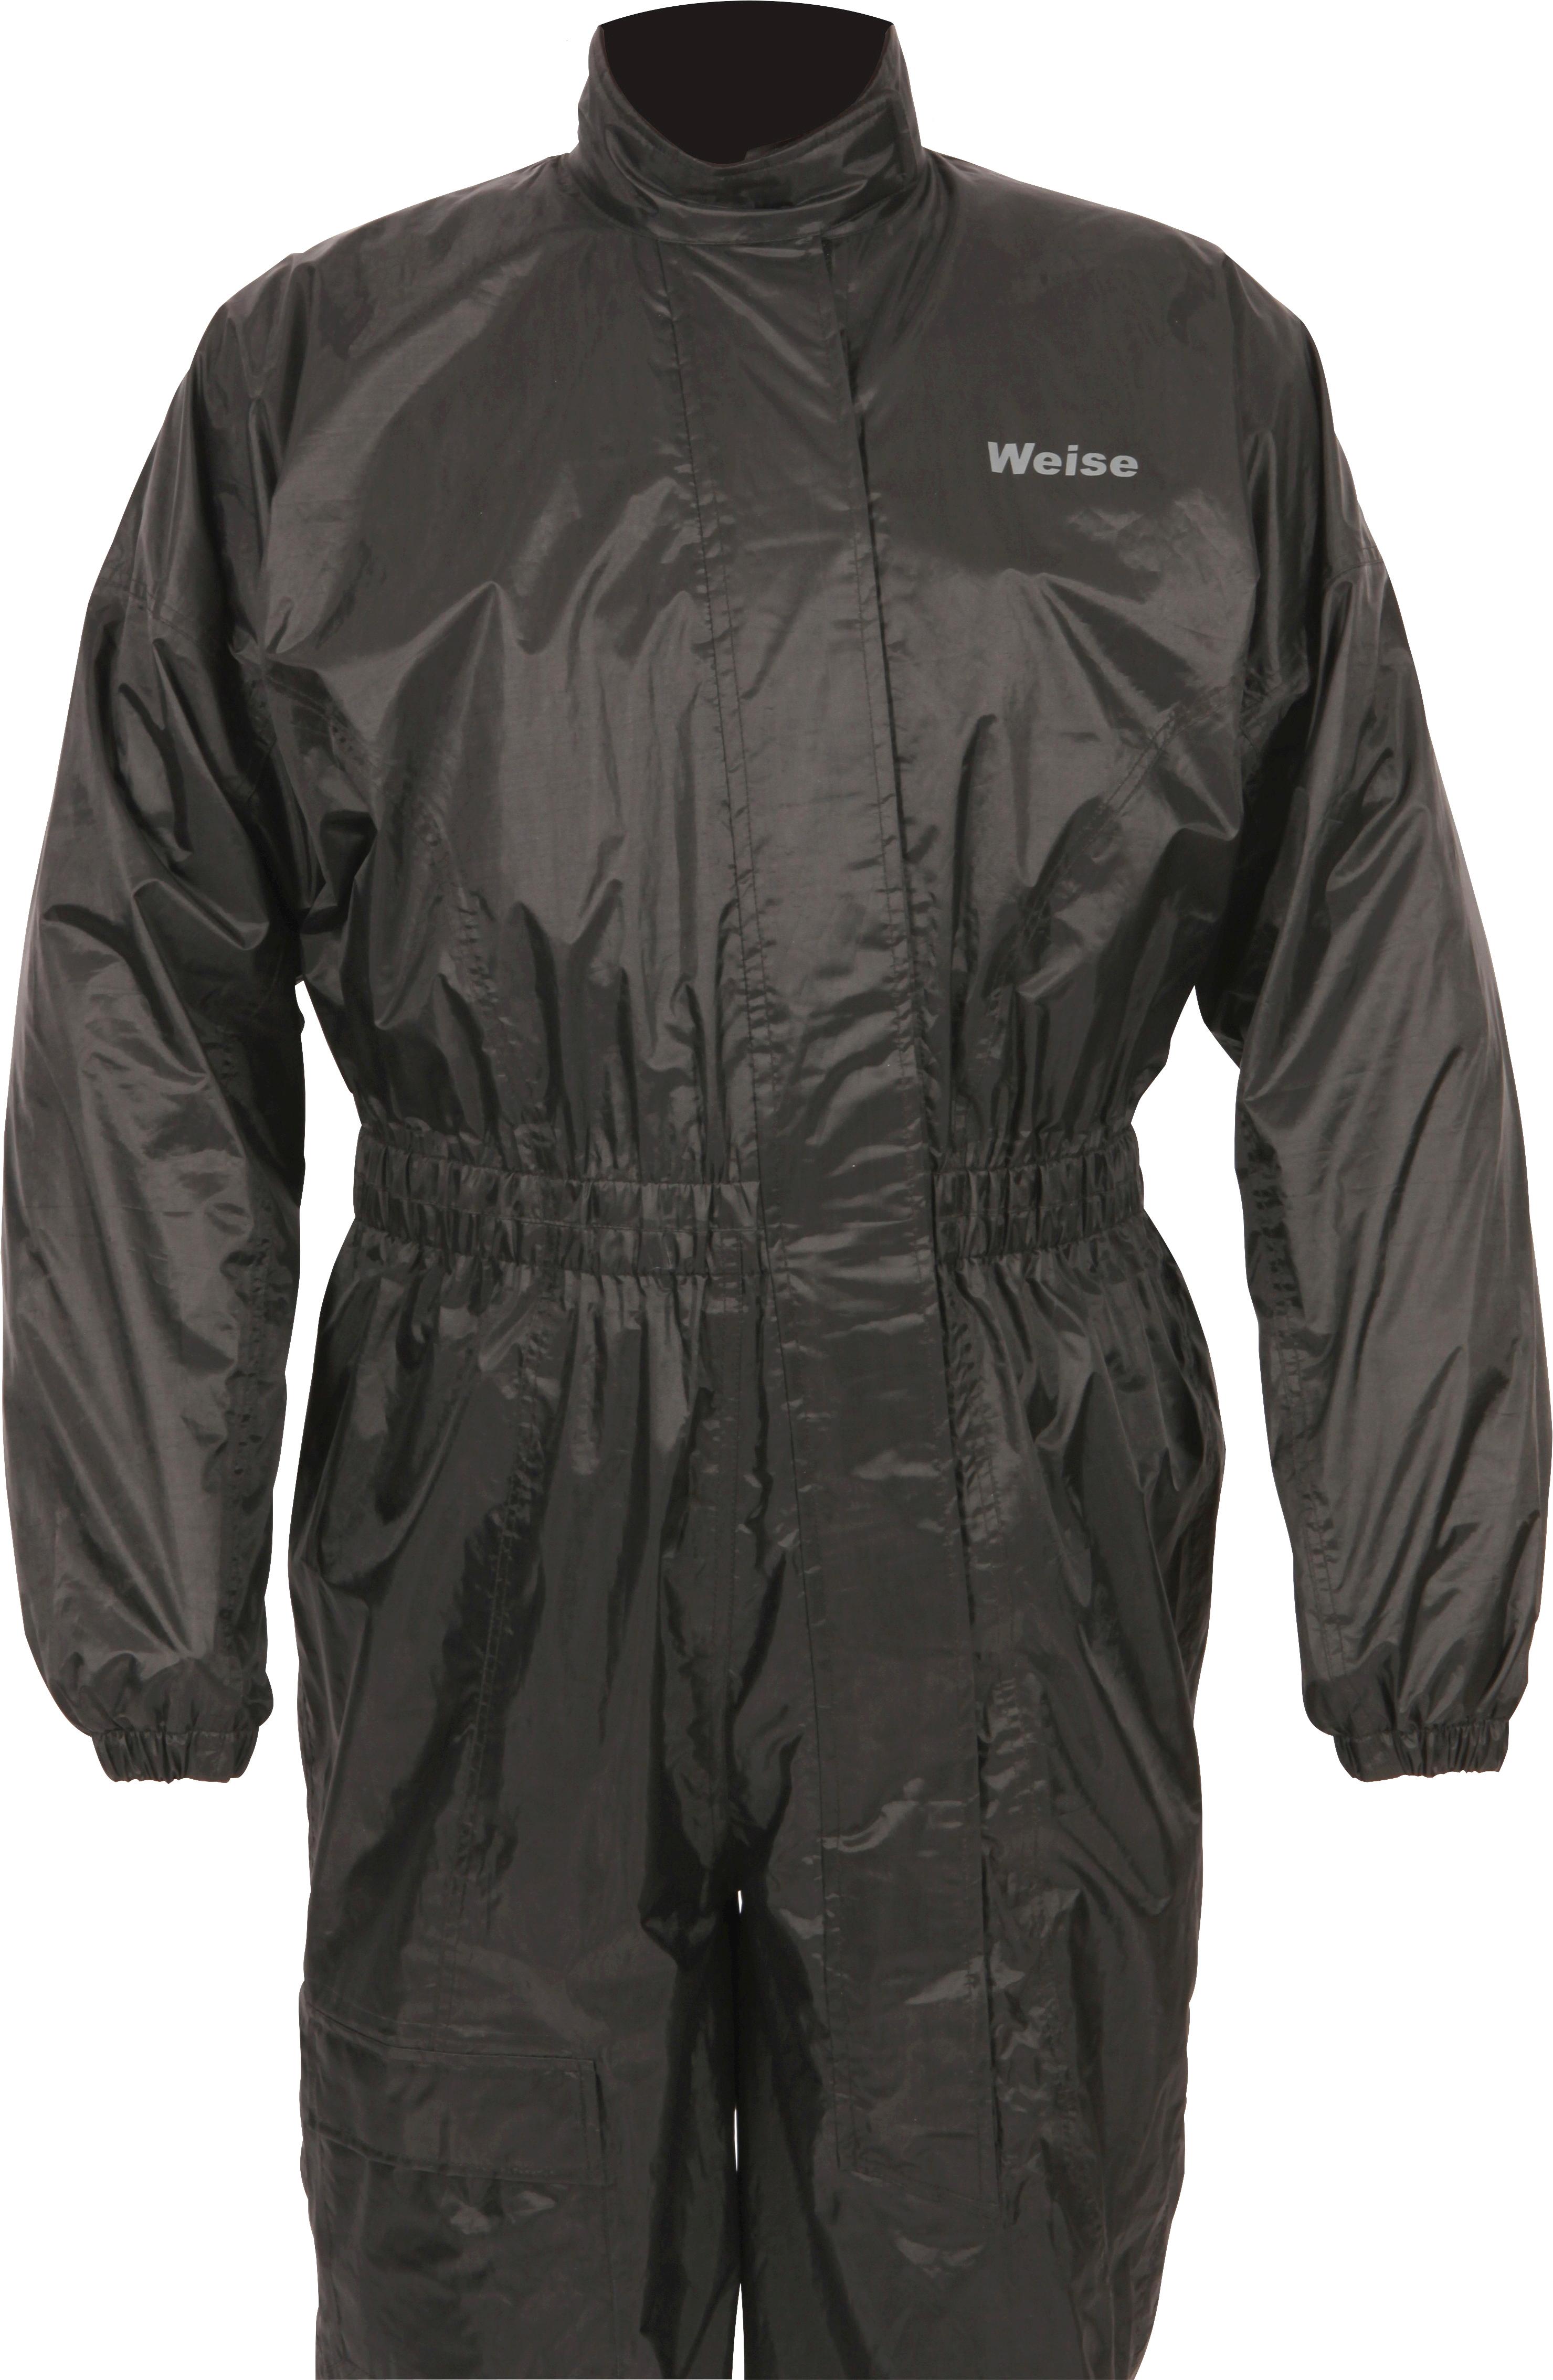 Weise Tempest Oversuit 5Xl